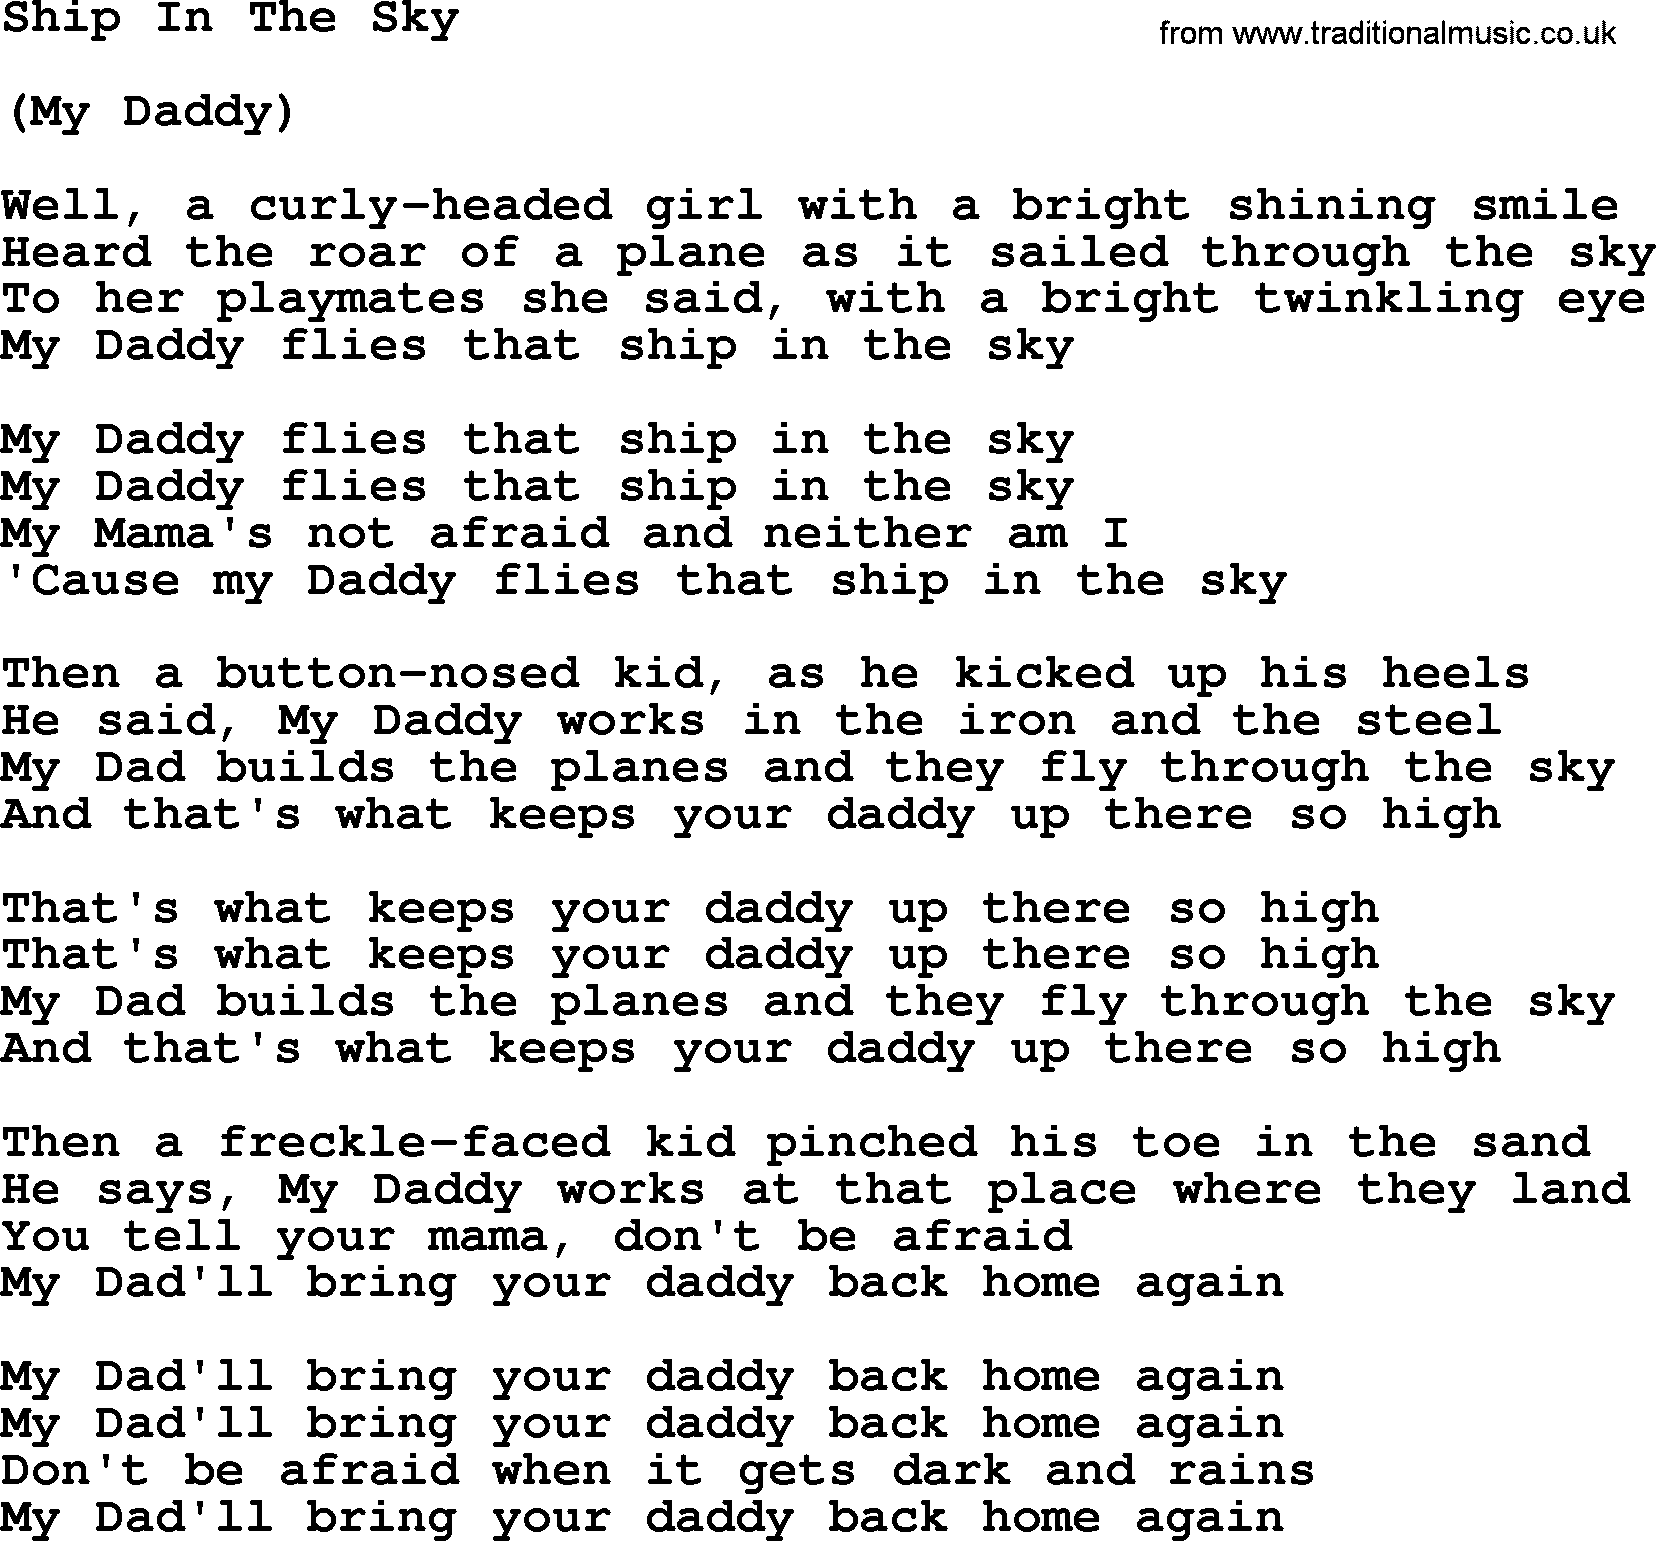 Woody Guthrie song Ship In The Sky lyrics